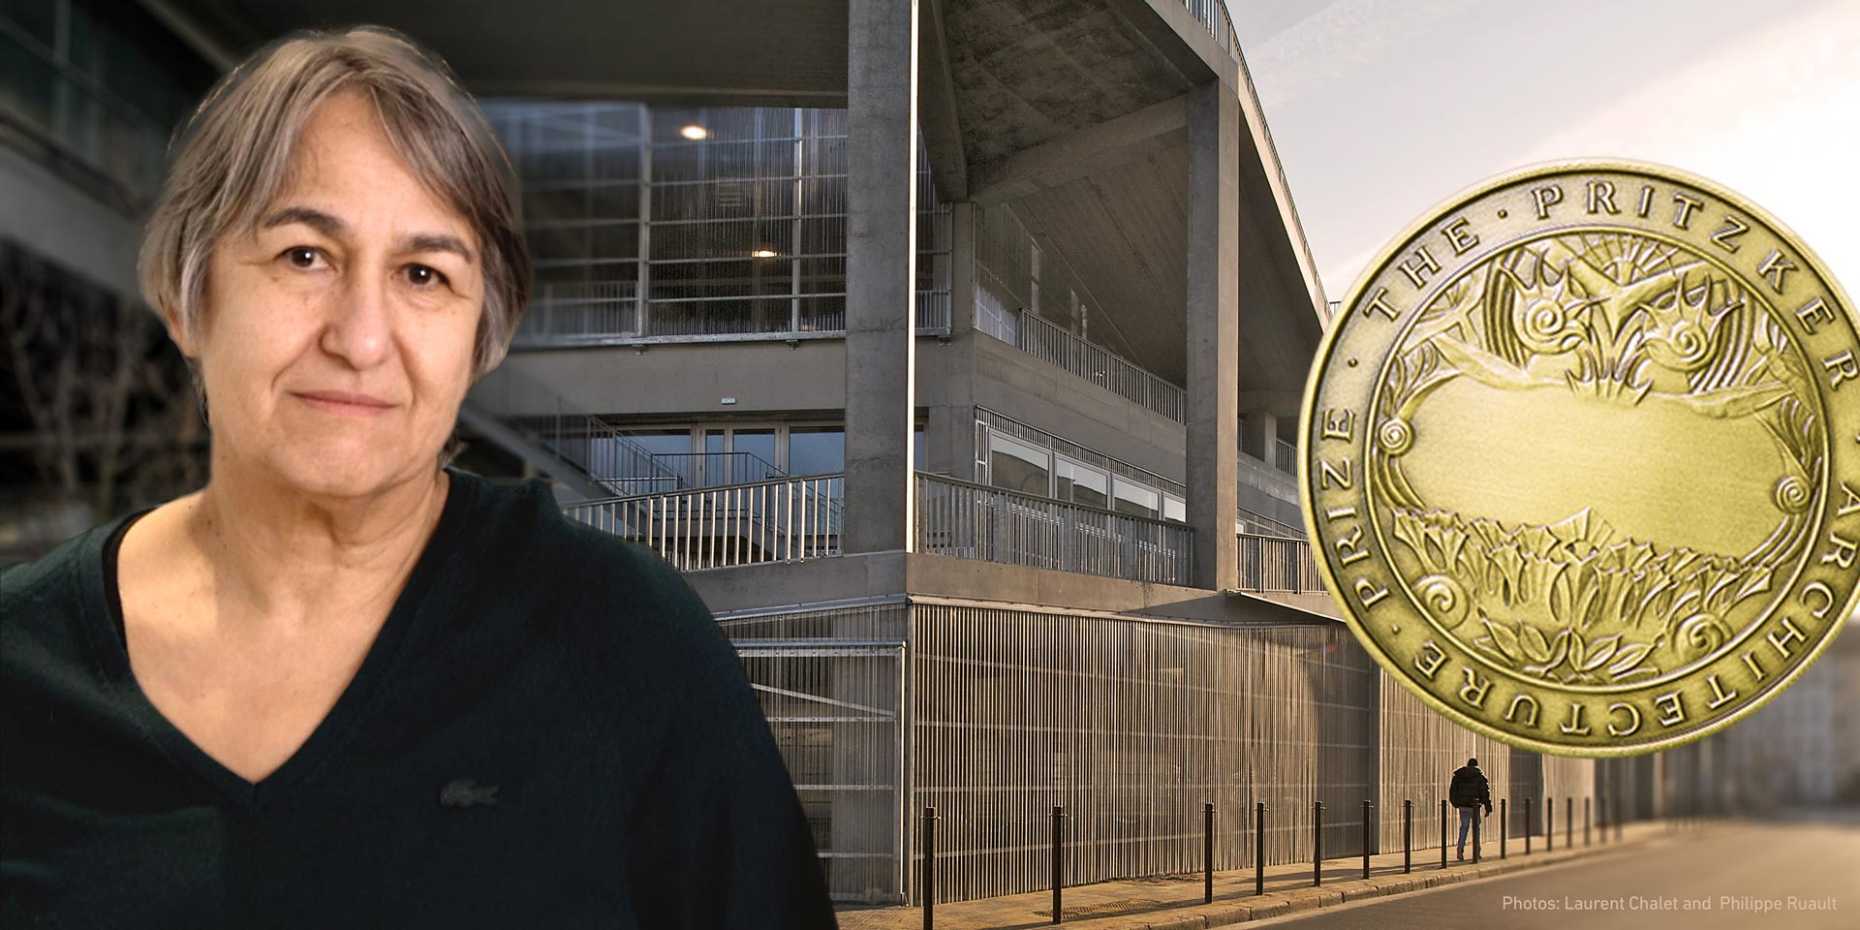 Enlarged view: Anne Lacaton is only the sixth woman to receive the Pritzker Prize, and the first female ETH professor to win an award as prestigious on the international stage as the Nobel Prize or the Fields Medal.